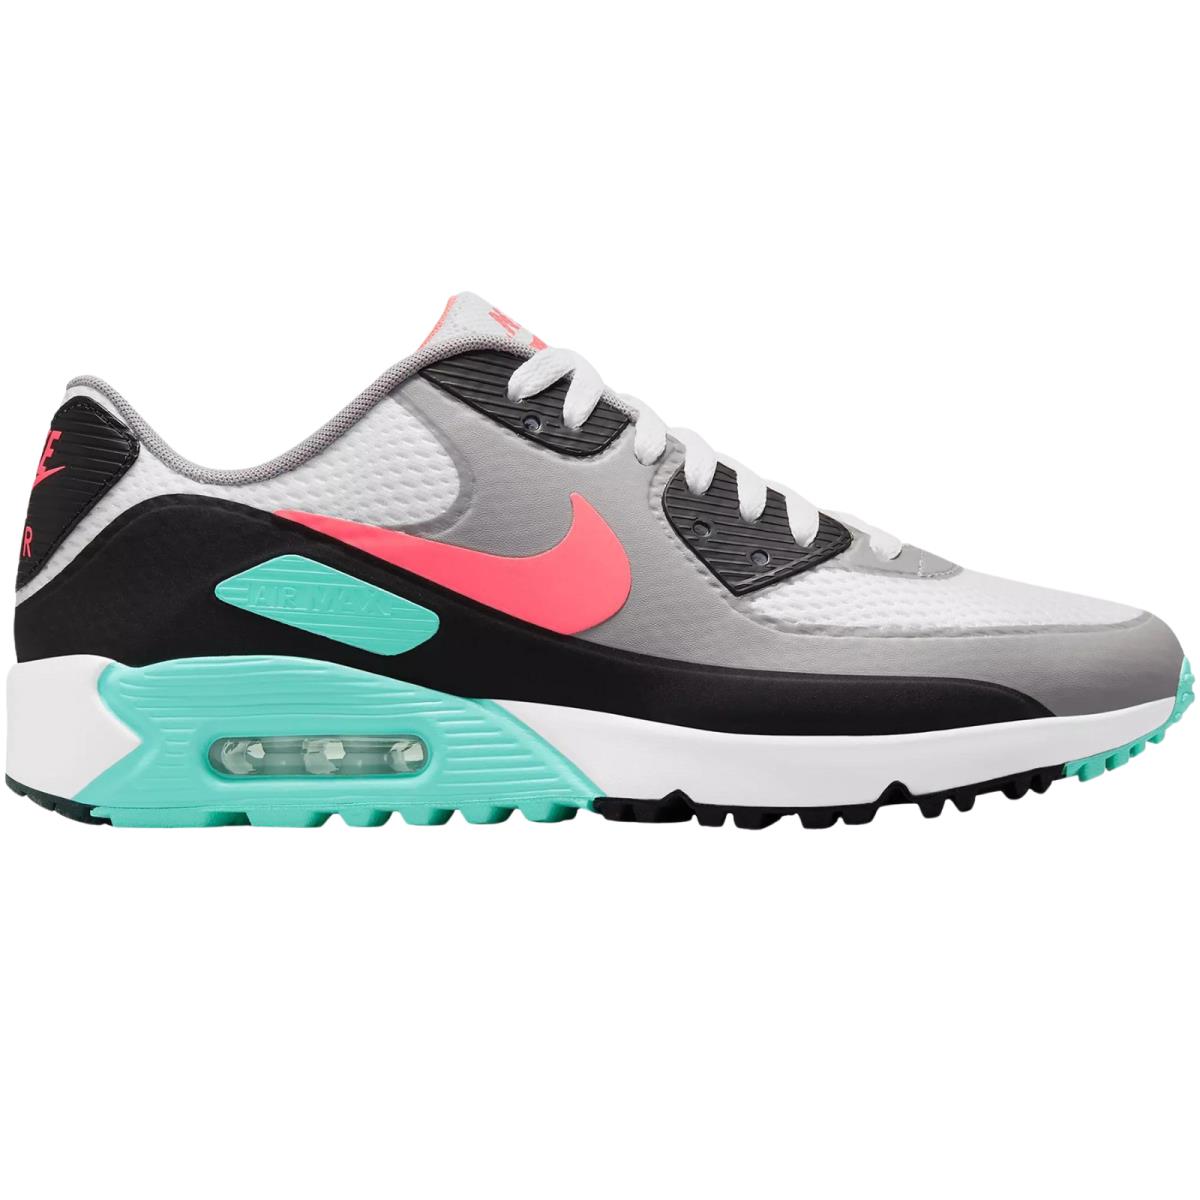 Nike Air Max 90 G Men`s Golf Shoes All Colors US Sizes 7-14 White/Hot Punch